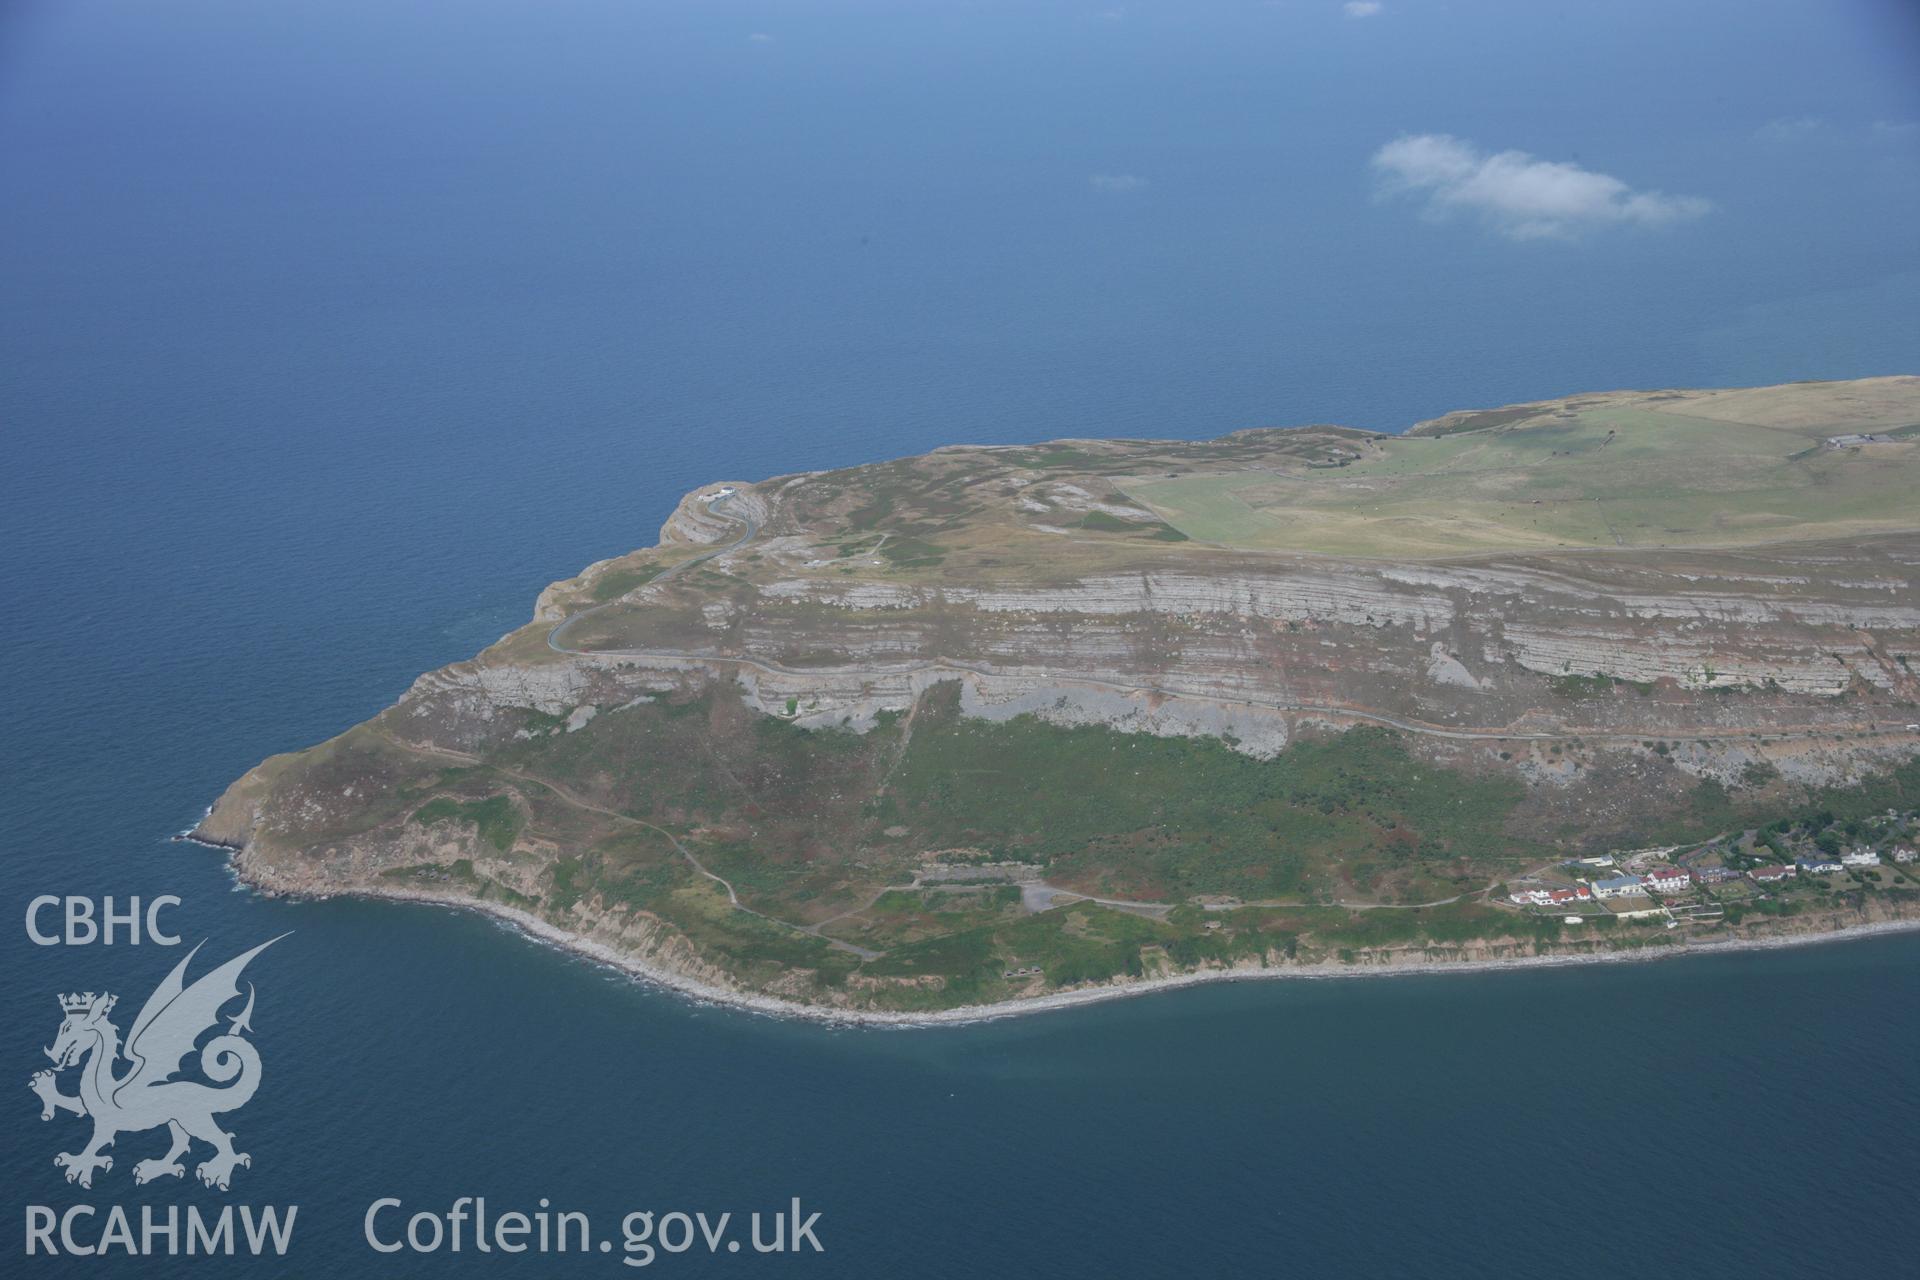 RCAHMW colour oblique aerial photograph of Great Orme Copper Mine from the west. Taken on 14 August 2006 by Toby Driver.